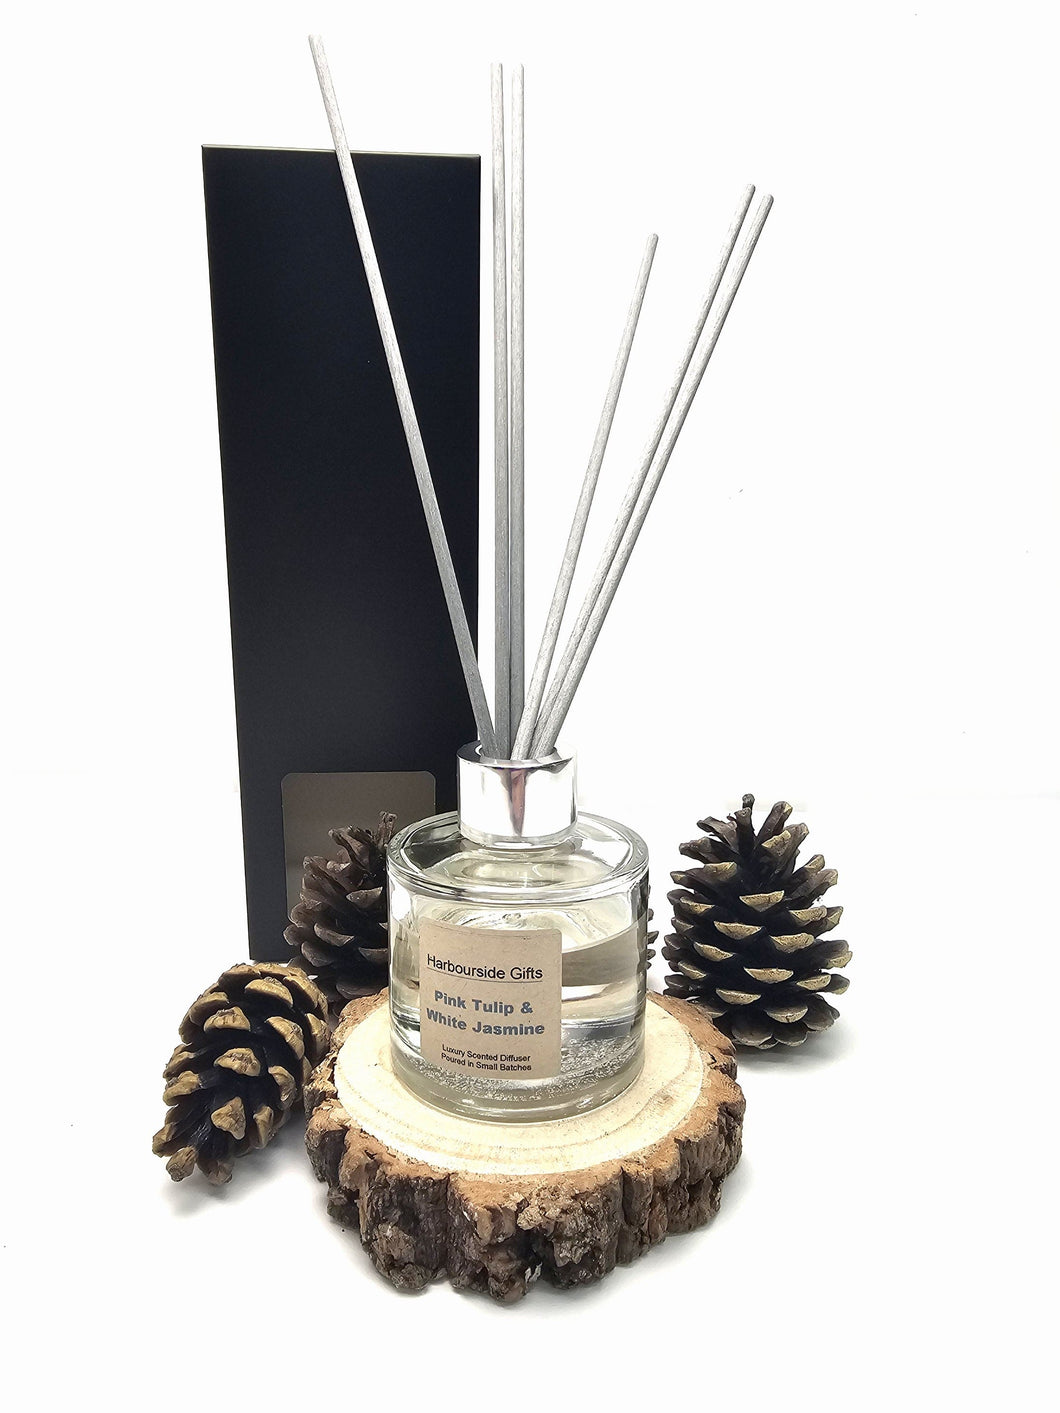 Pink Tulip & White Jasmine Oil Reed Diffuser 100ml with 6 High Quality Reeds in Gift Box PTWJDIFF100 Harbourside Gifts